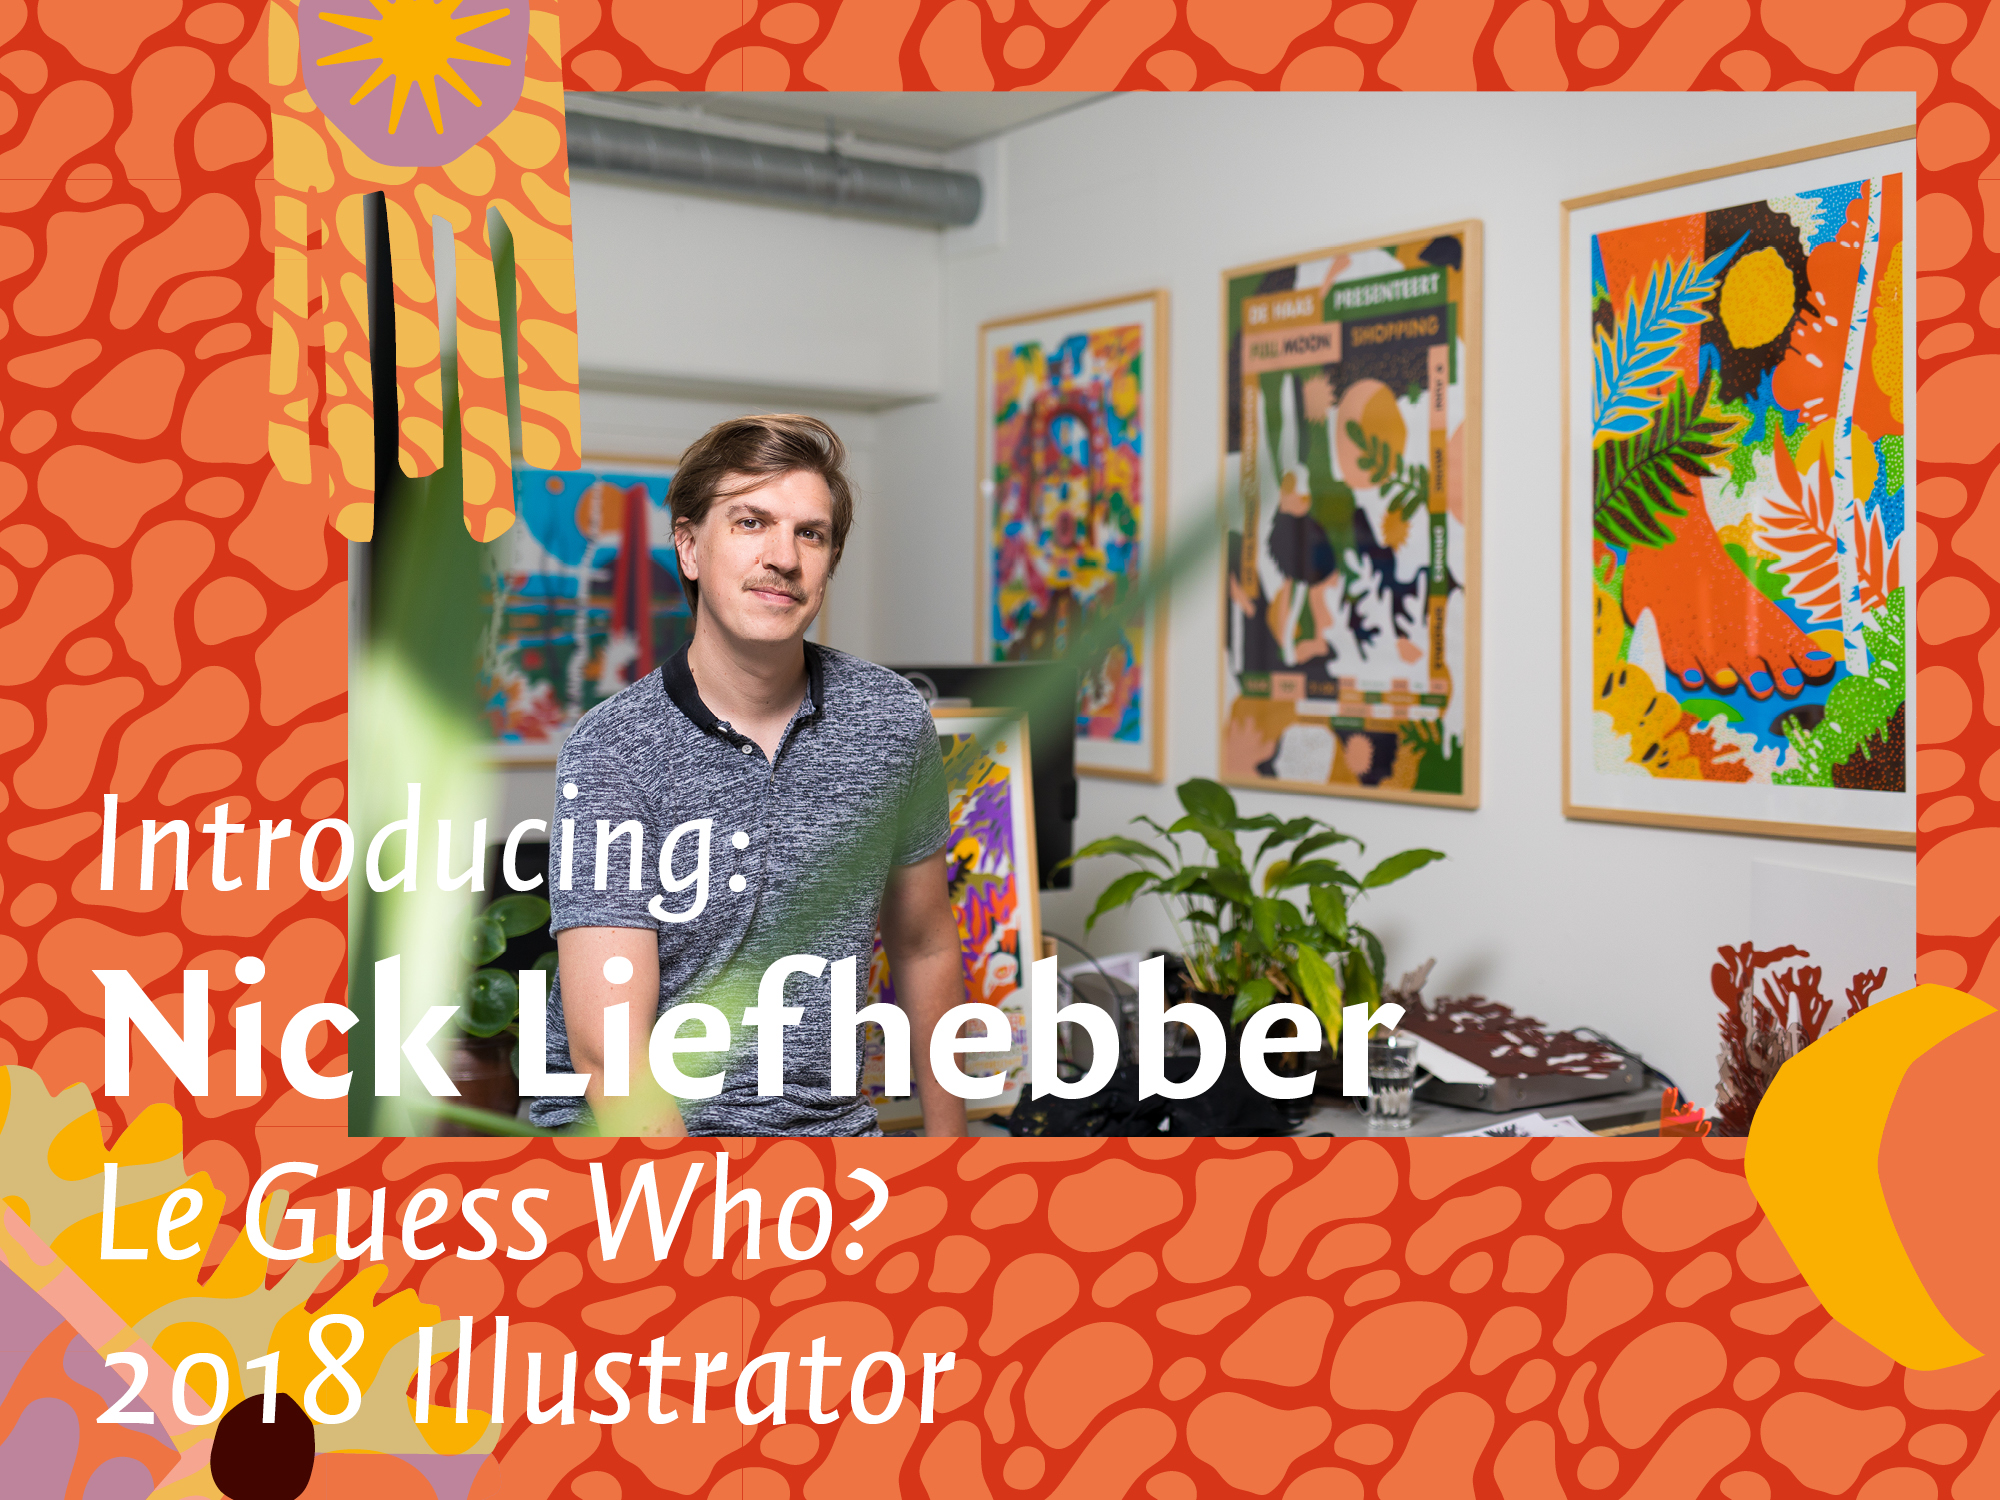 Introducing: Nick Liefhebber, the Le Guess Who? 2018 Illustrator